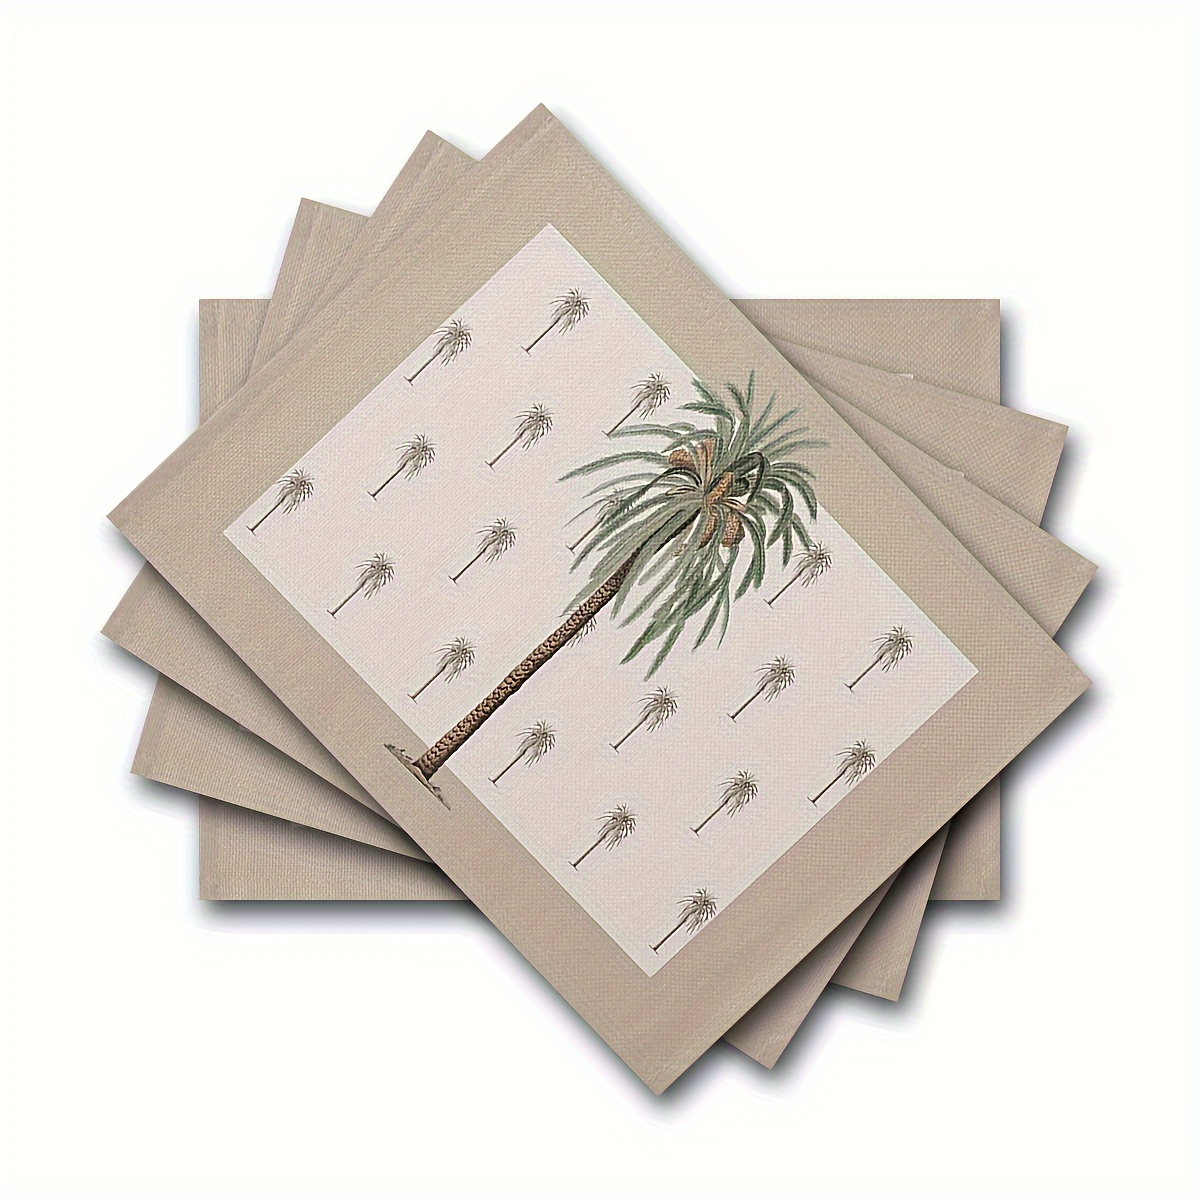 

4pcs, Placemats, Dinner Heat Resistant Table Mats, Tropical Beach Palm Tree Printed Washable Non-slip Insulation Placemat, For Banquet, Kitchen Dining Table Decor